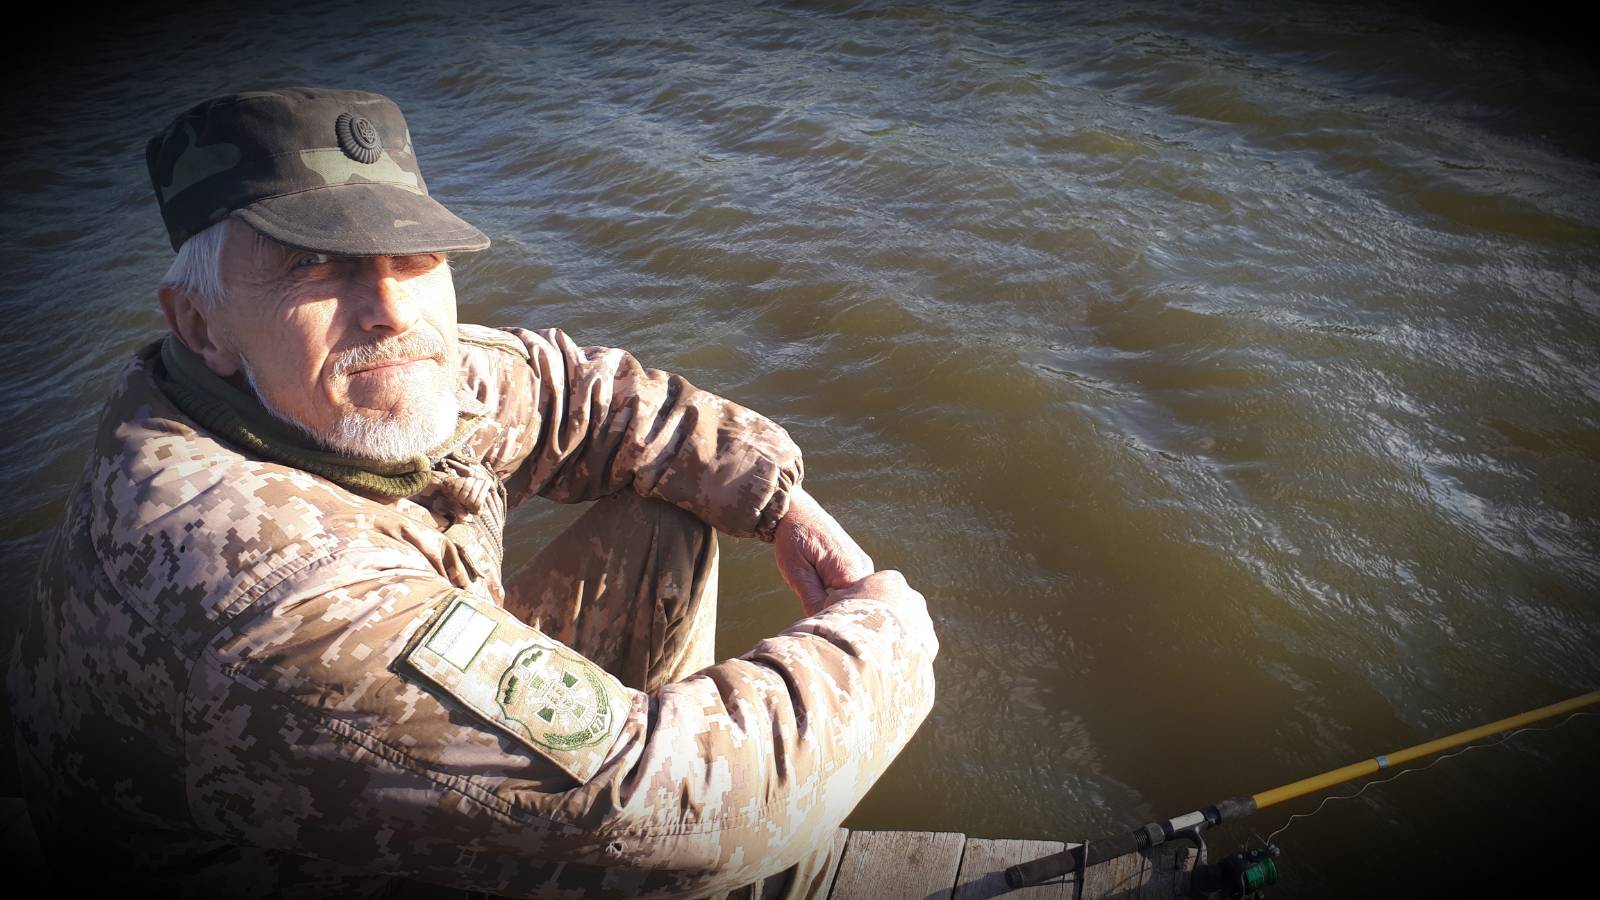 A man in a Ukrainian soldier uniform sits on a dock next to water.